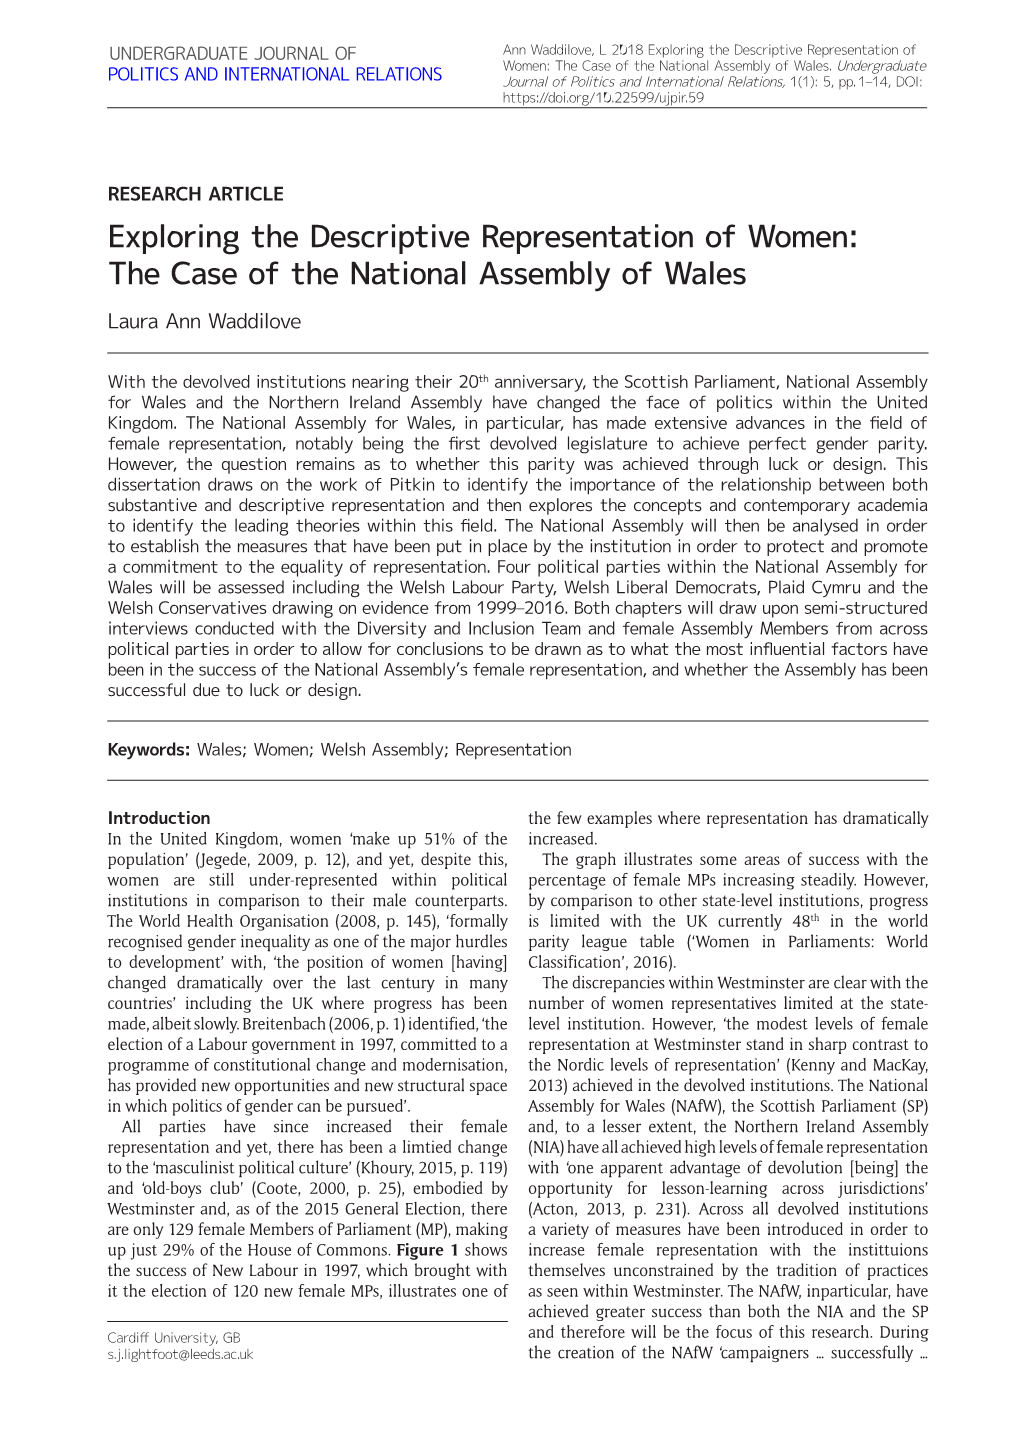 Exploring the Descriptive Representation of Women: the Case of the National Assembly of Wales